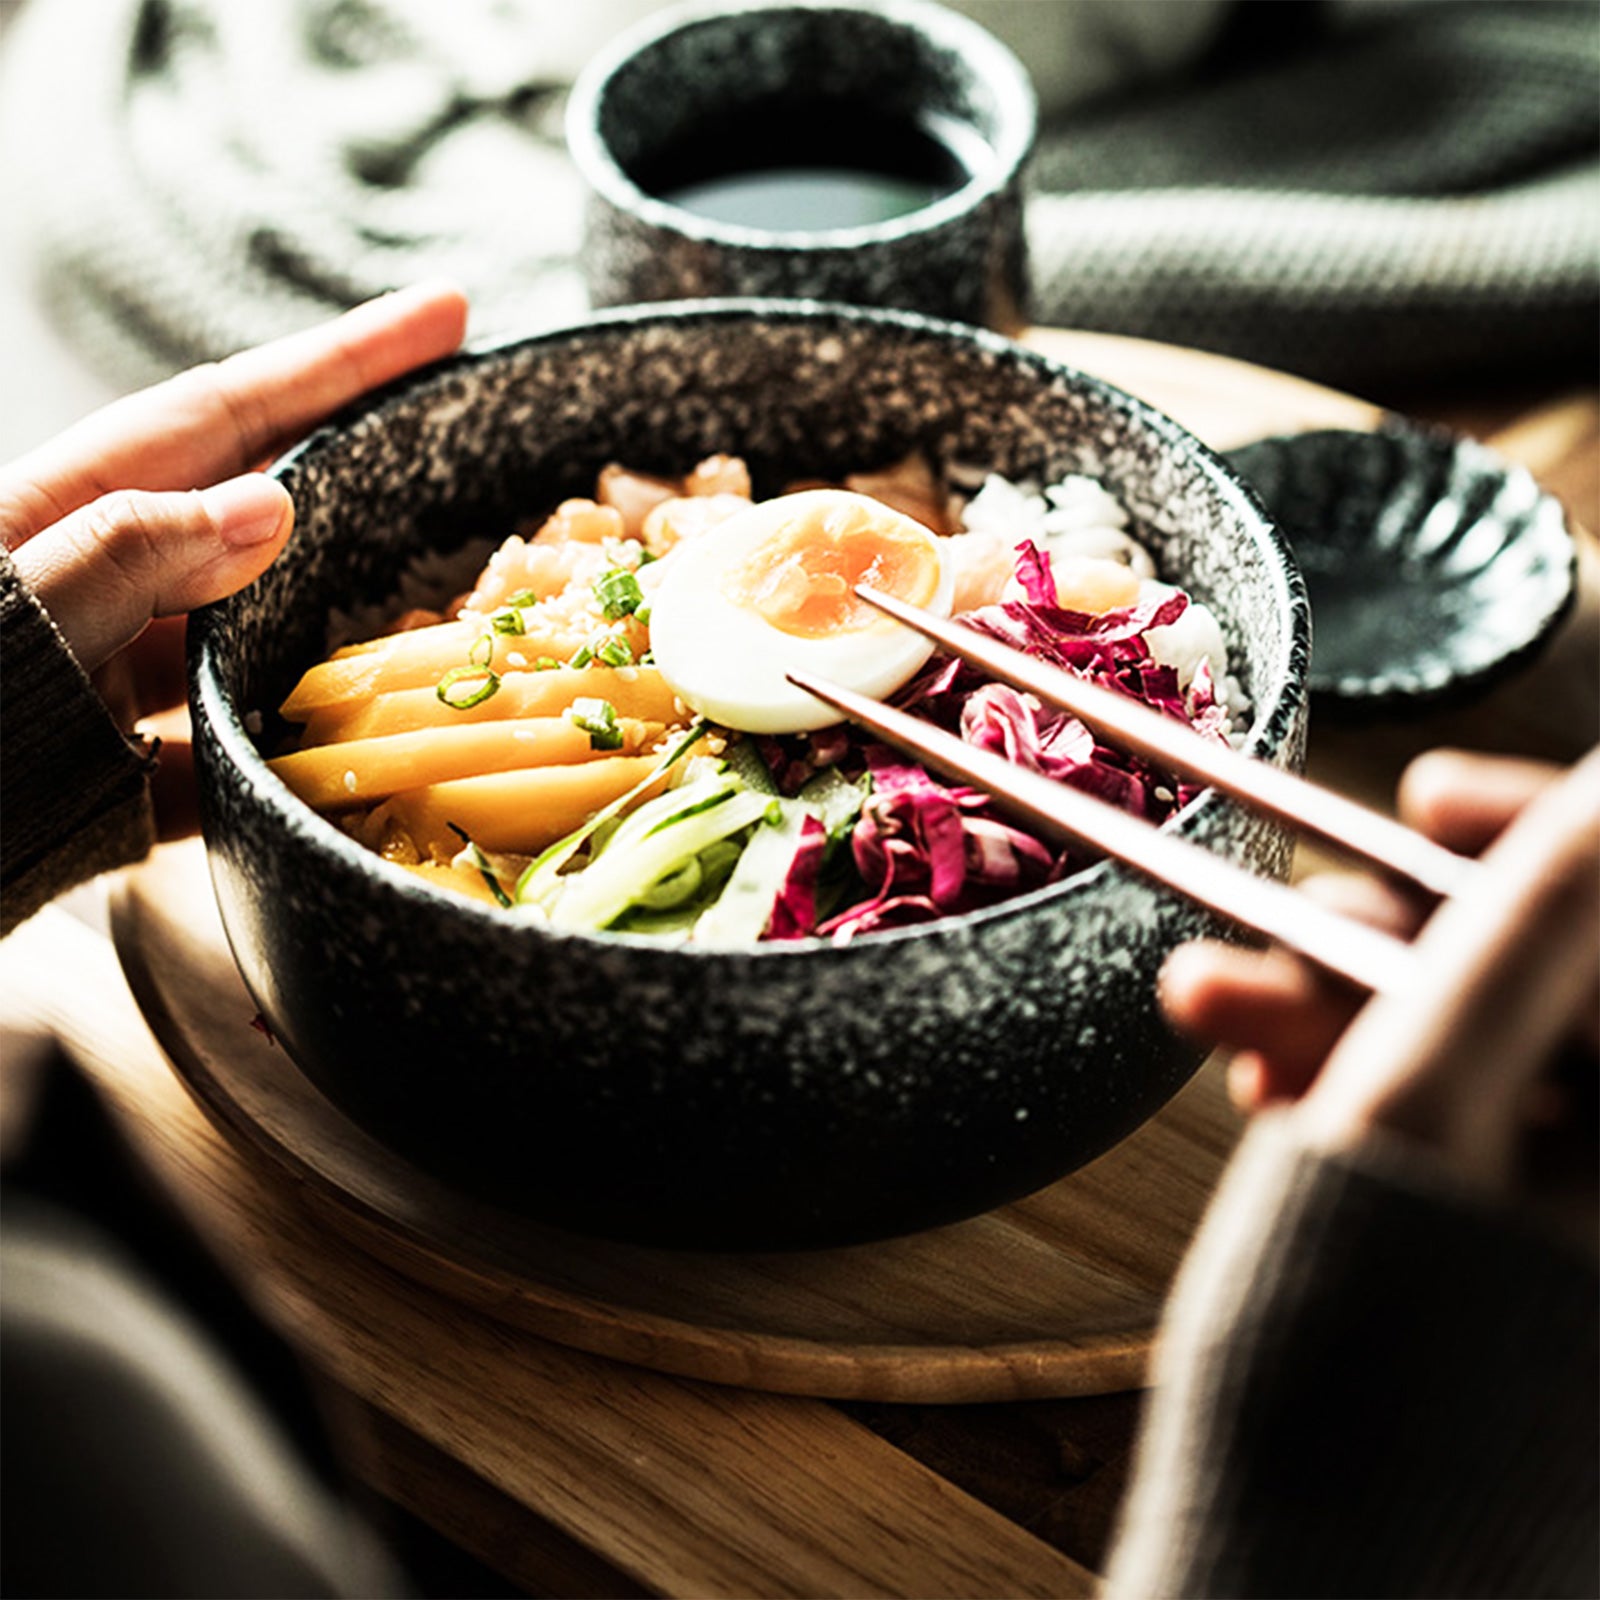 Japanese-Inspired Pigmented Noodle Bowls - Choose from 6 Styles and 2 Sizes